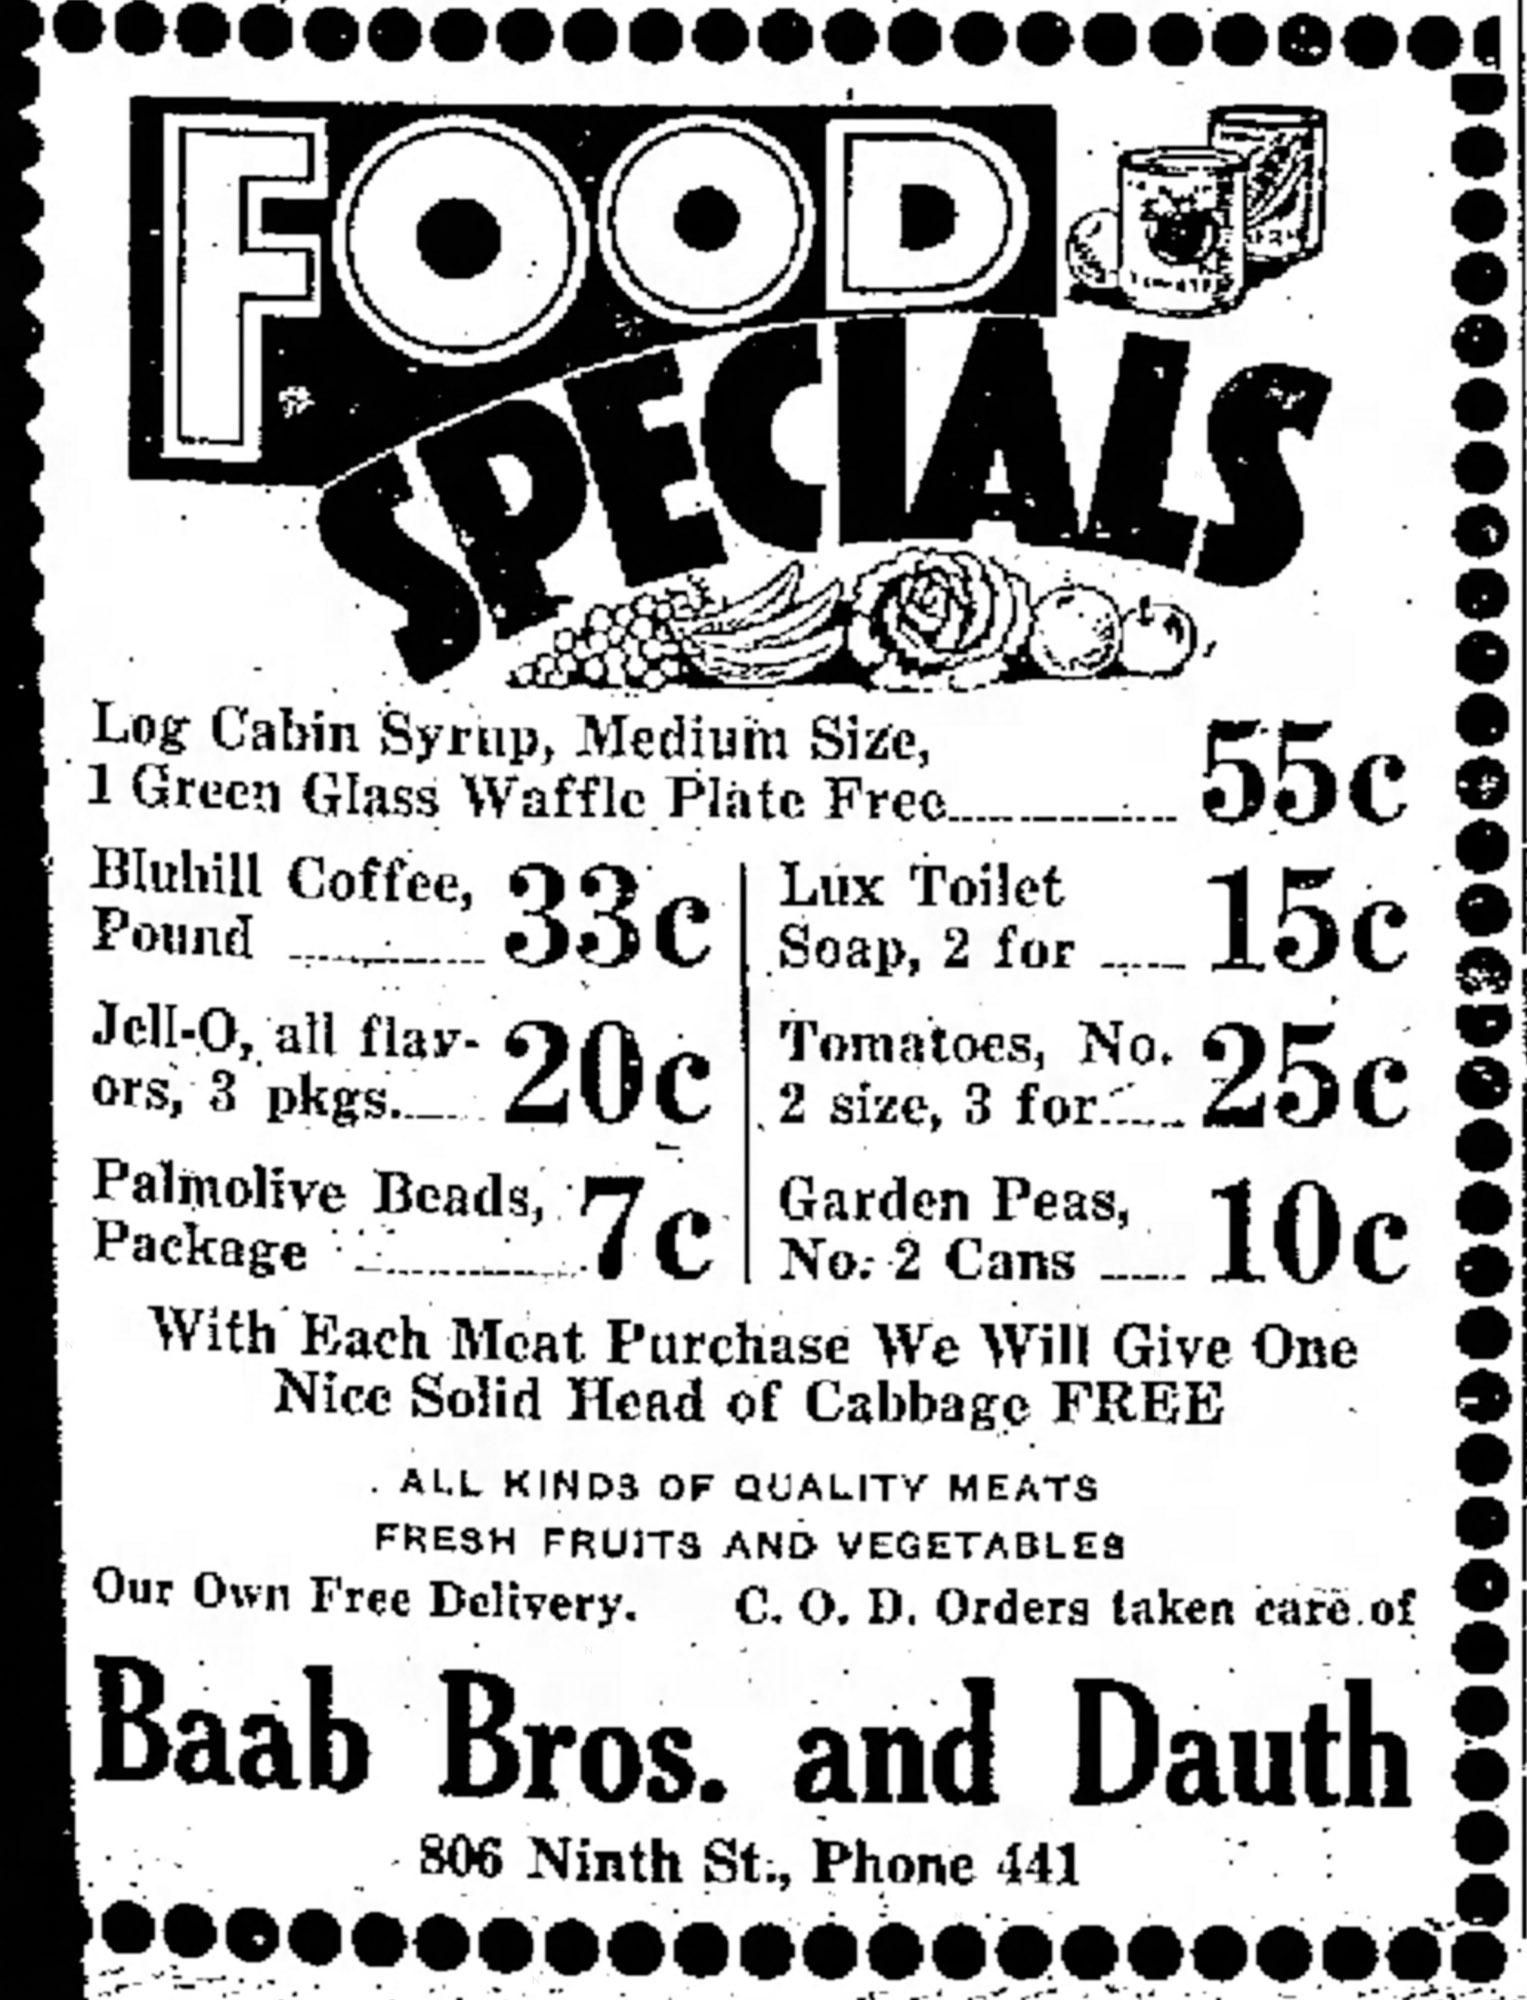 Dauth Family Archive - 1932-11-11 - Greeley Daily Tribune - Baab Bros and Dauth Advertisement